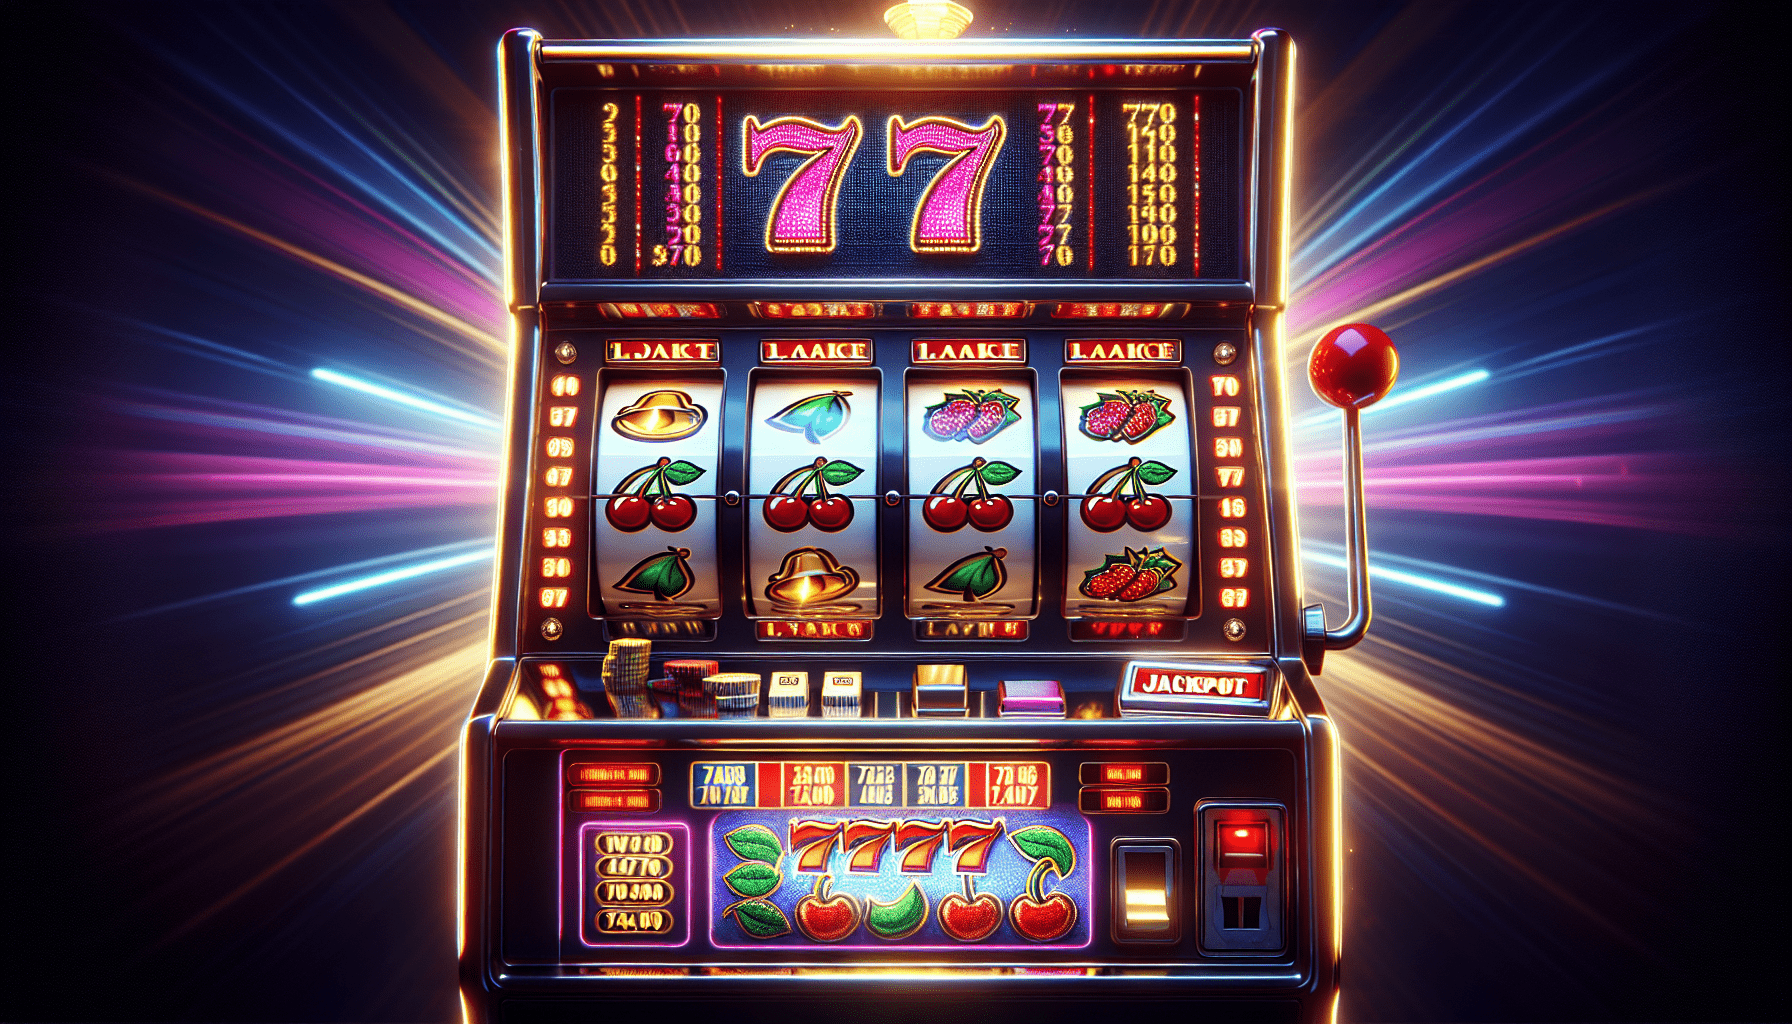 What Slot Machine Is Most Likely To Pay Out?